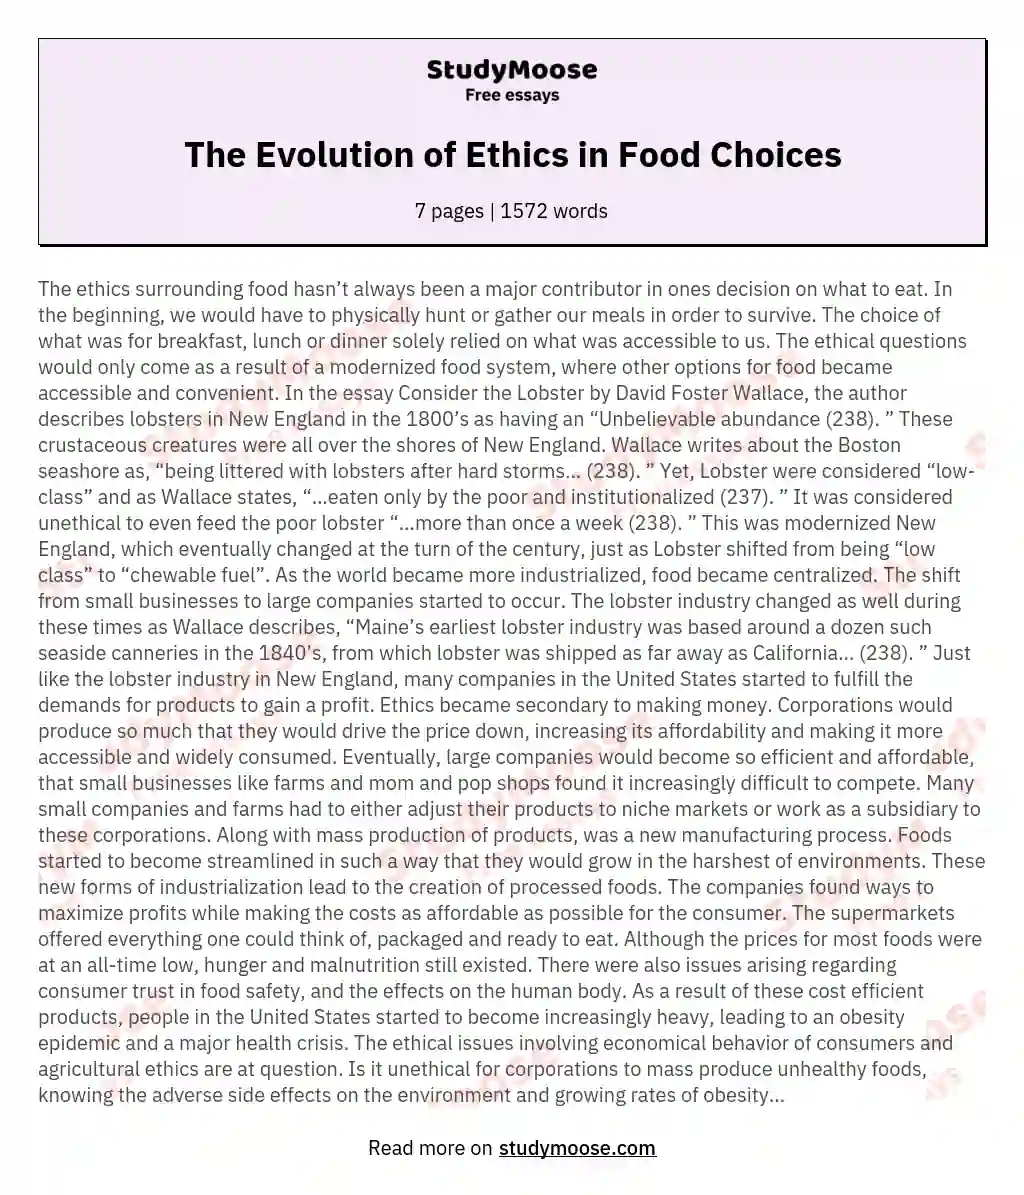 The Evolution of Ethics in Food Choices essay